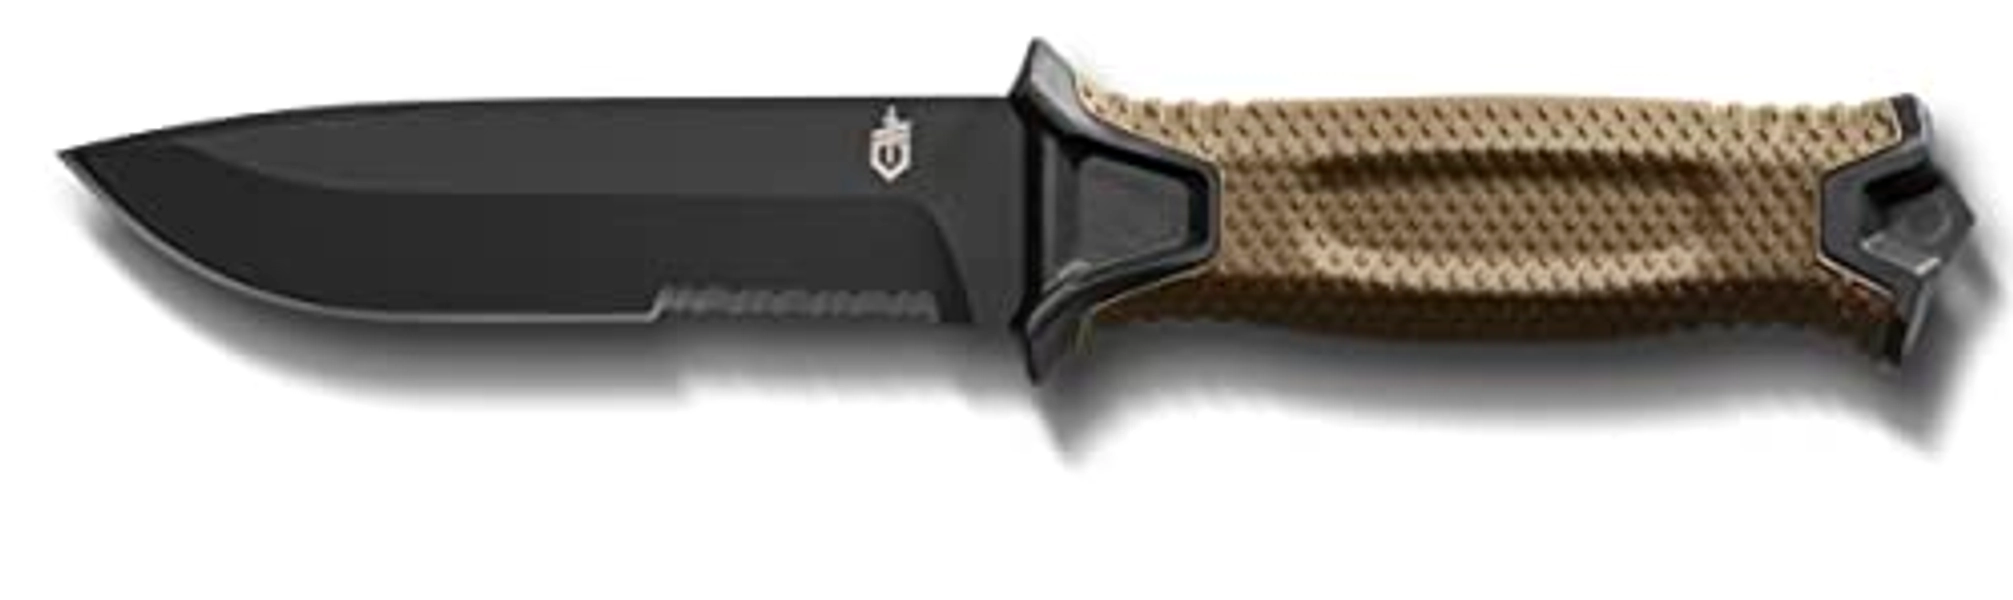 Gerber Gear Strongarm - Fixed Blade Tactical Knife for Survival Gear - Coyote Brown, Serrated Edge